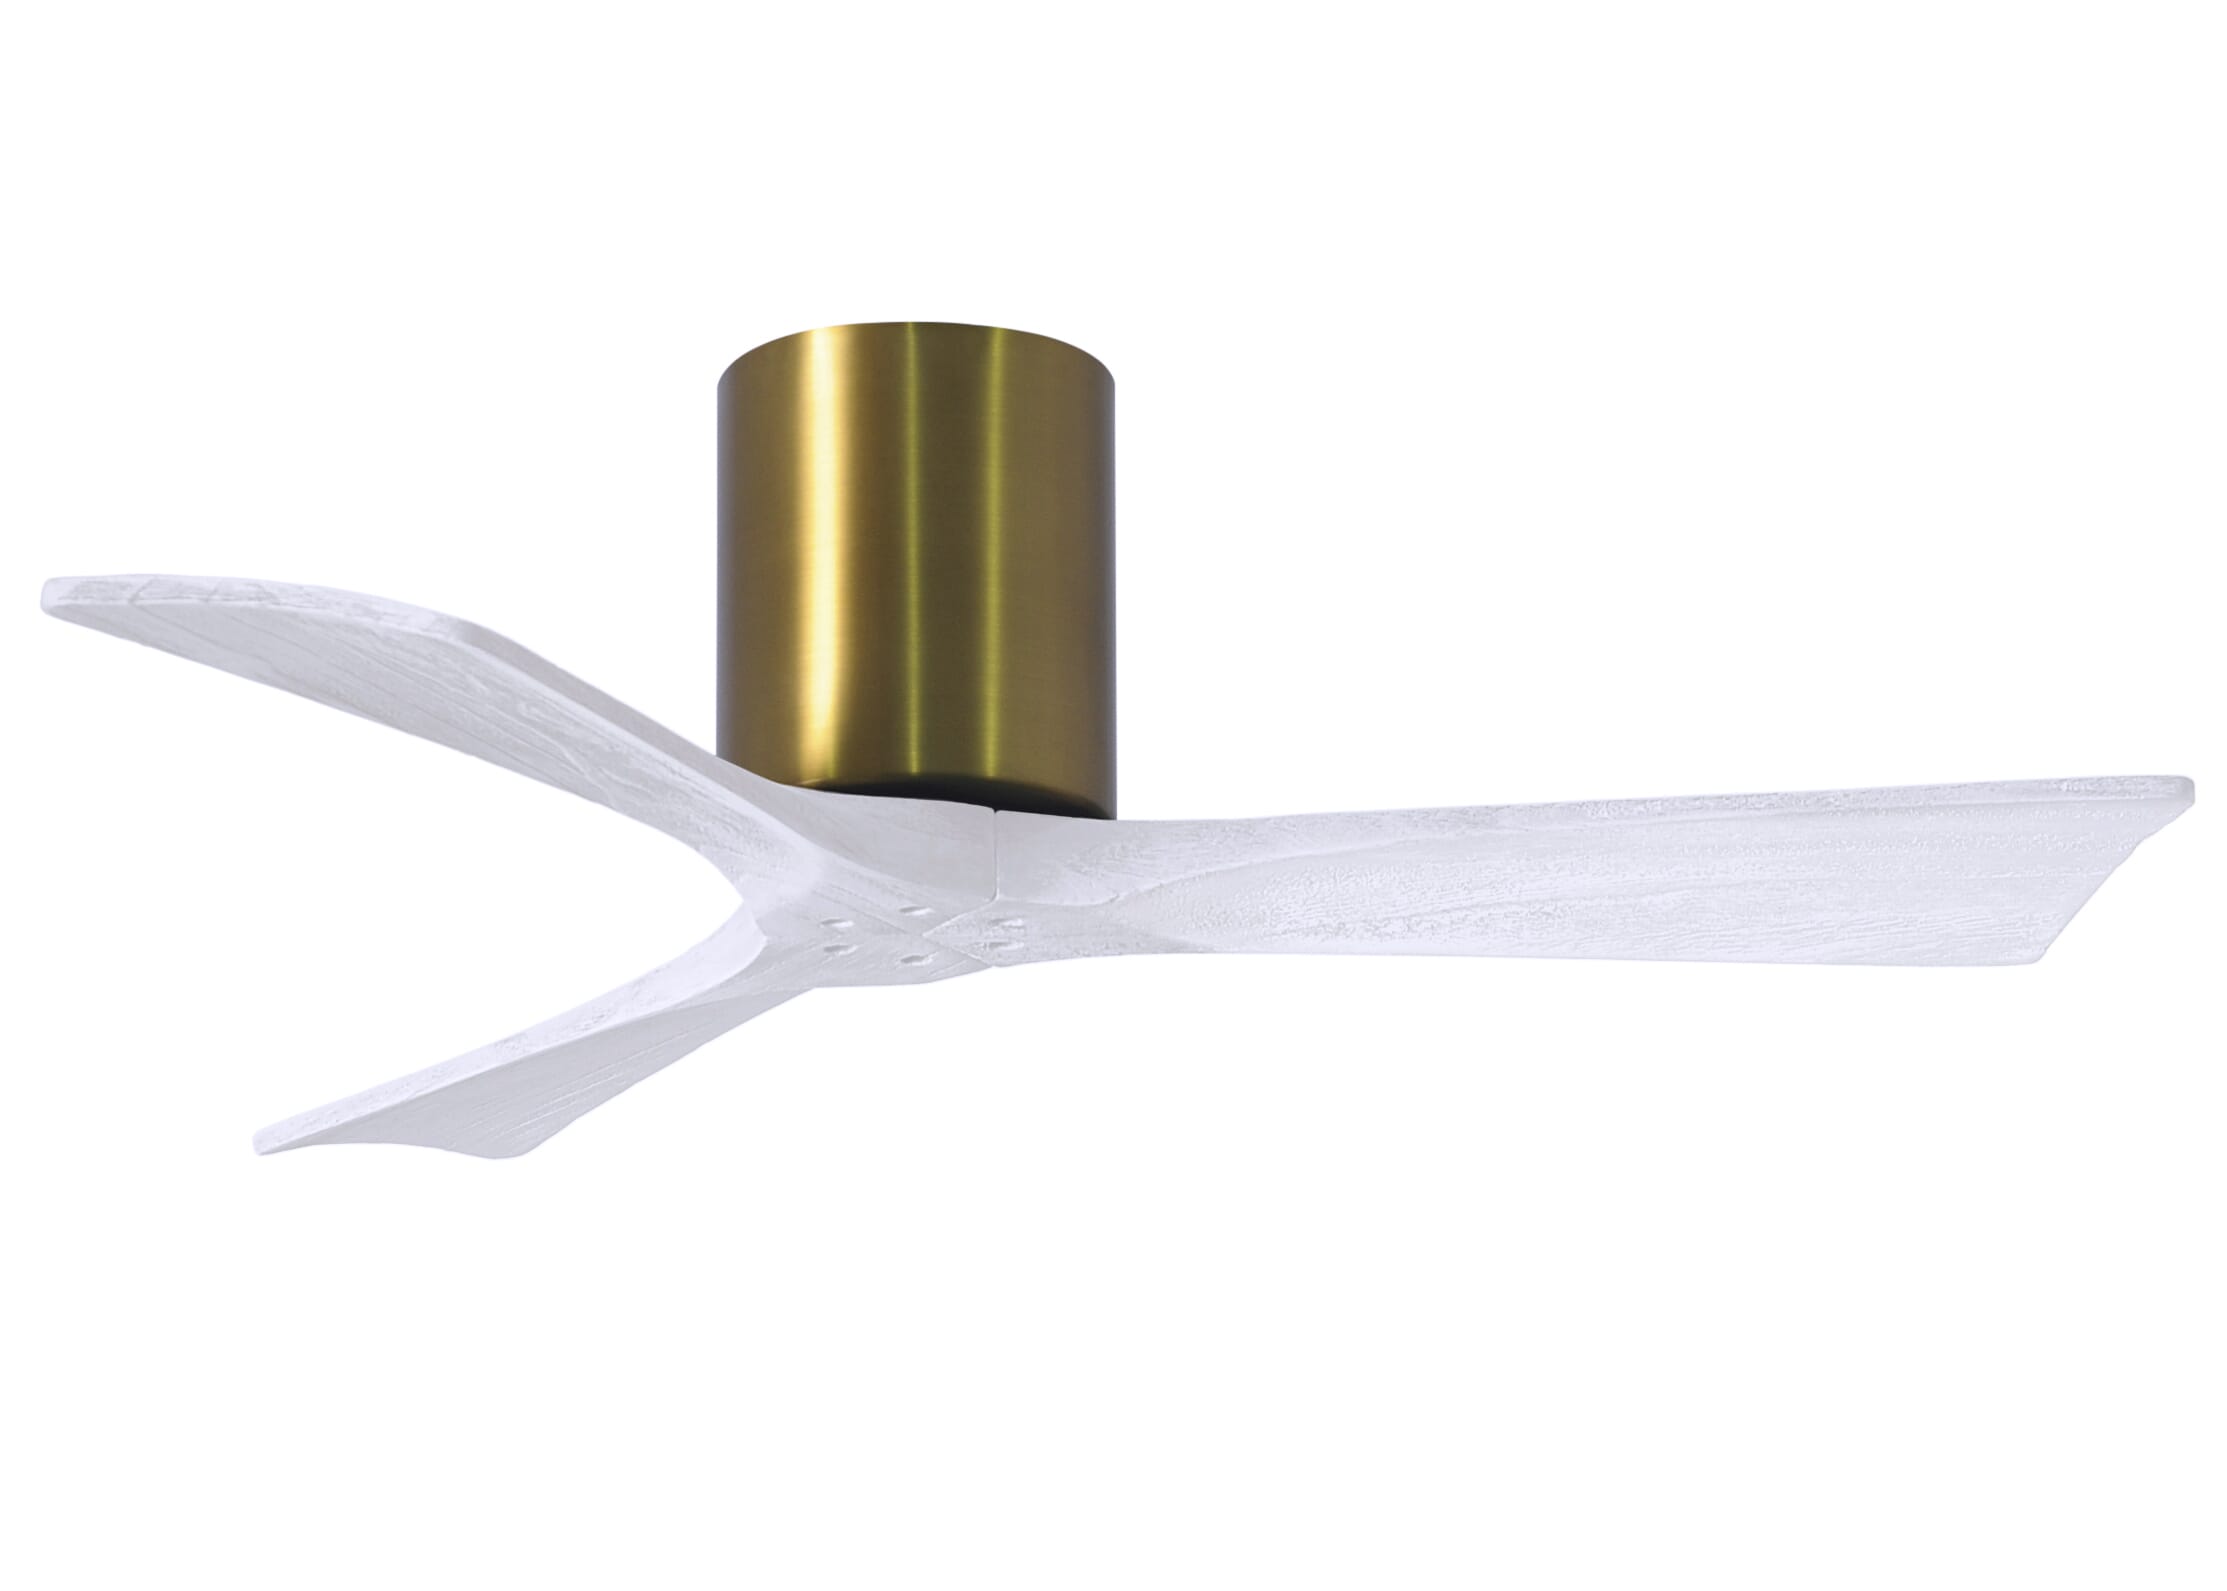 Irene 6-Speed DC 42"" Ceiling Fan in Brushed Brass with Matte White blades -  Matthews Fan Company, IR3H-BRBR-MWH-42